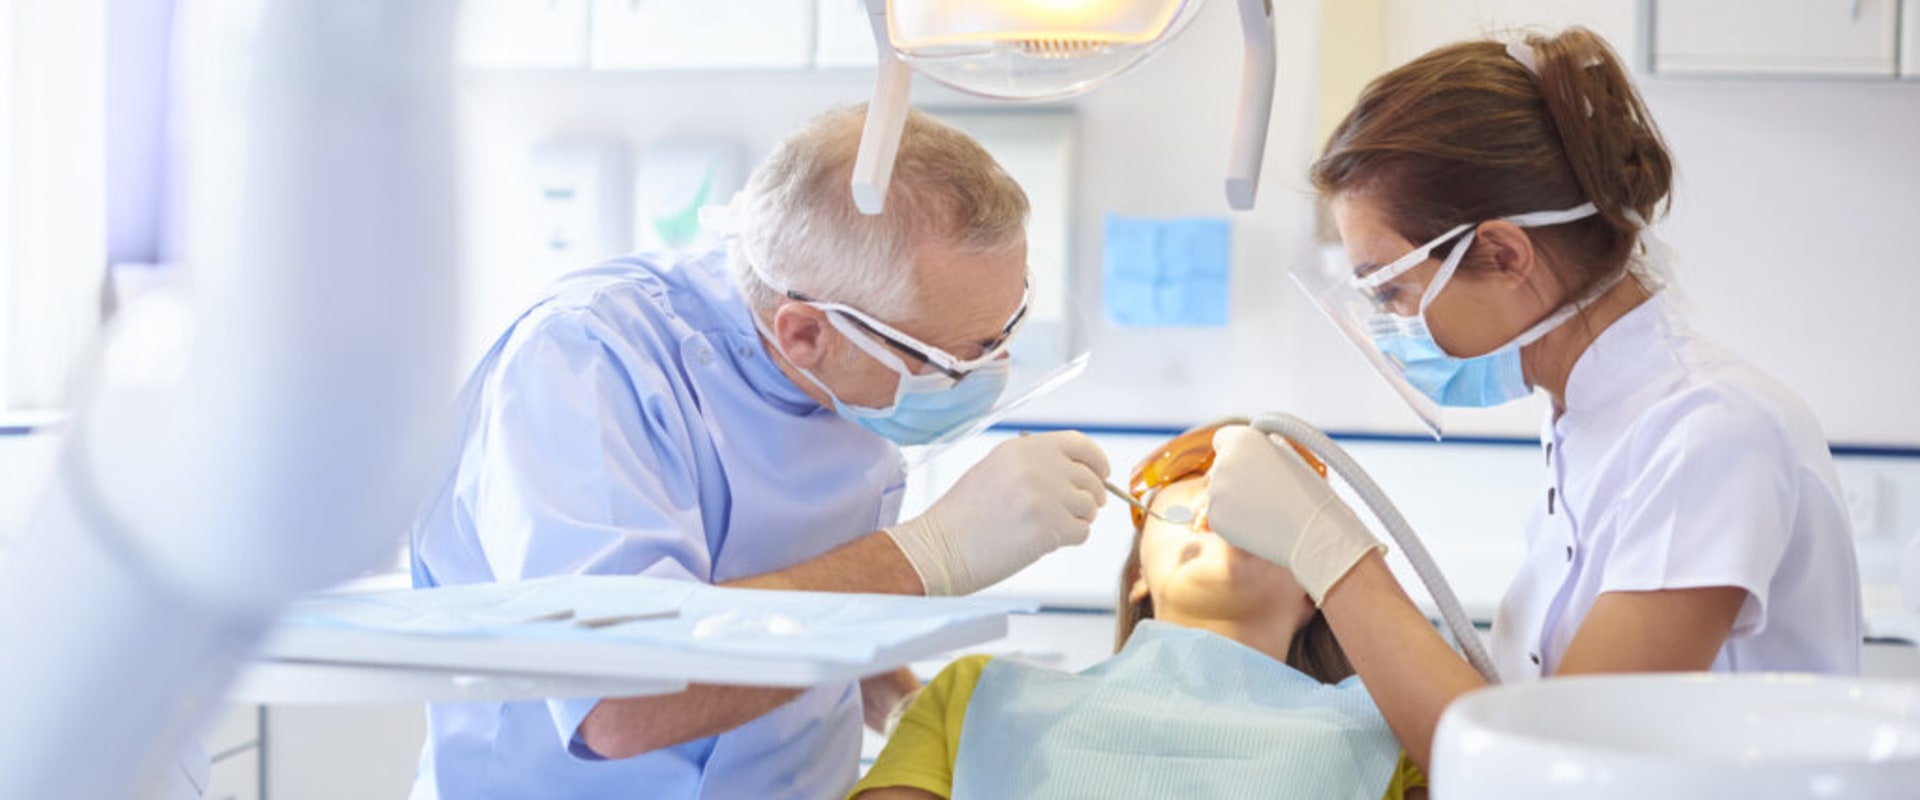 Maximizing Precision And Comfort With Laser Dentistry For Dental Implants In Canberra